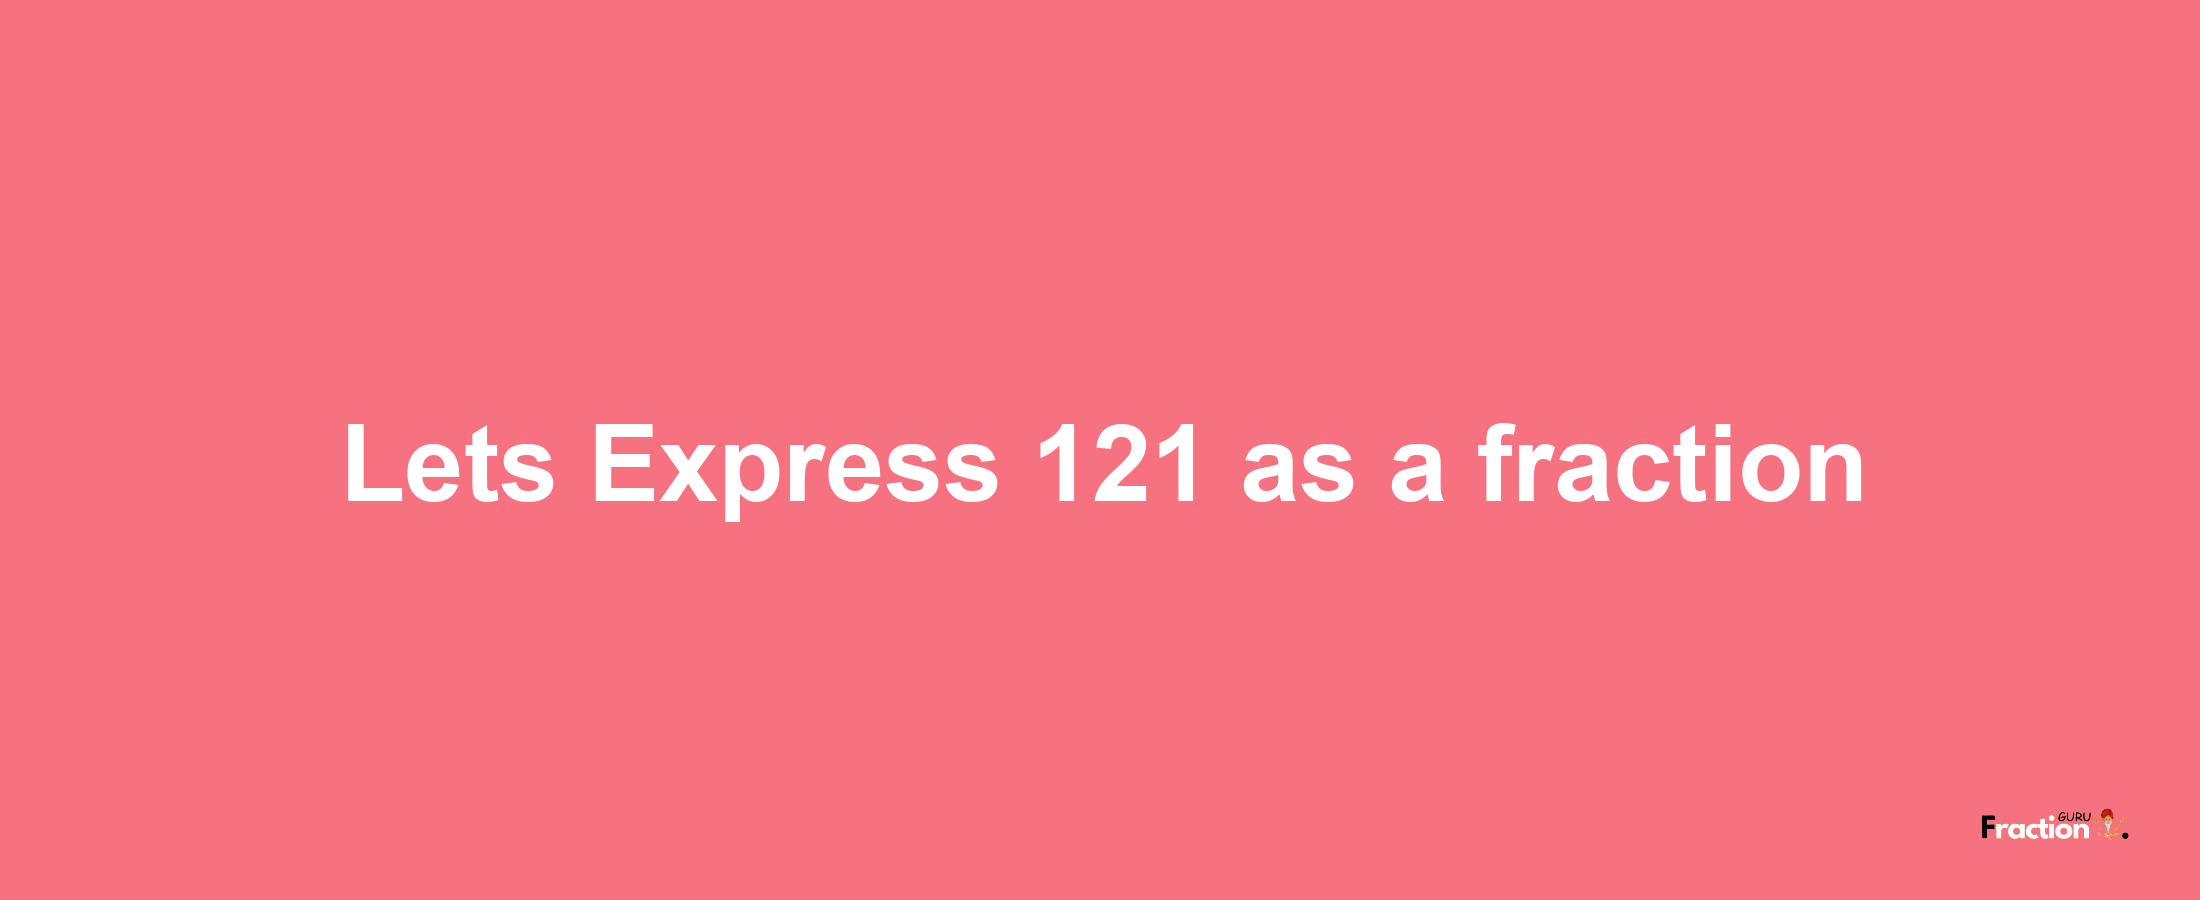 Lets Express 121 as afraction